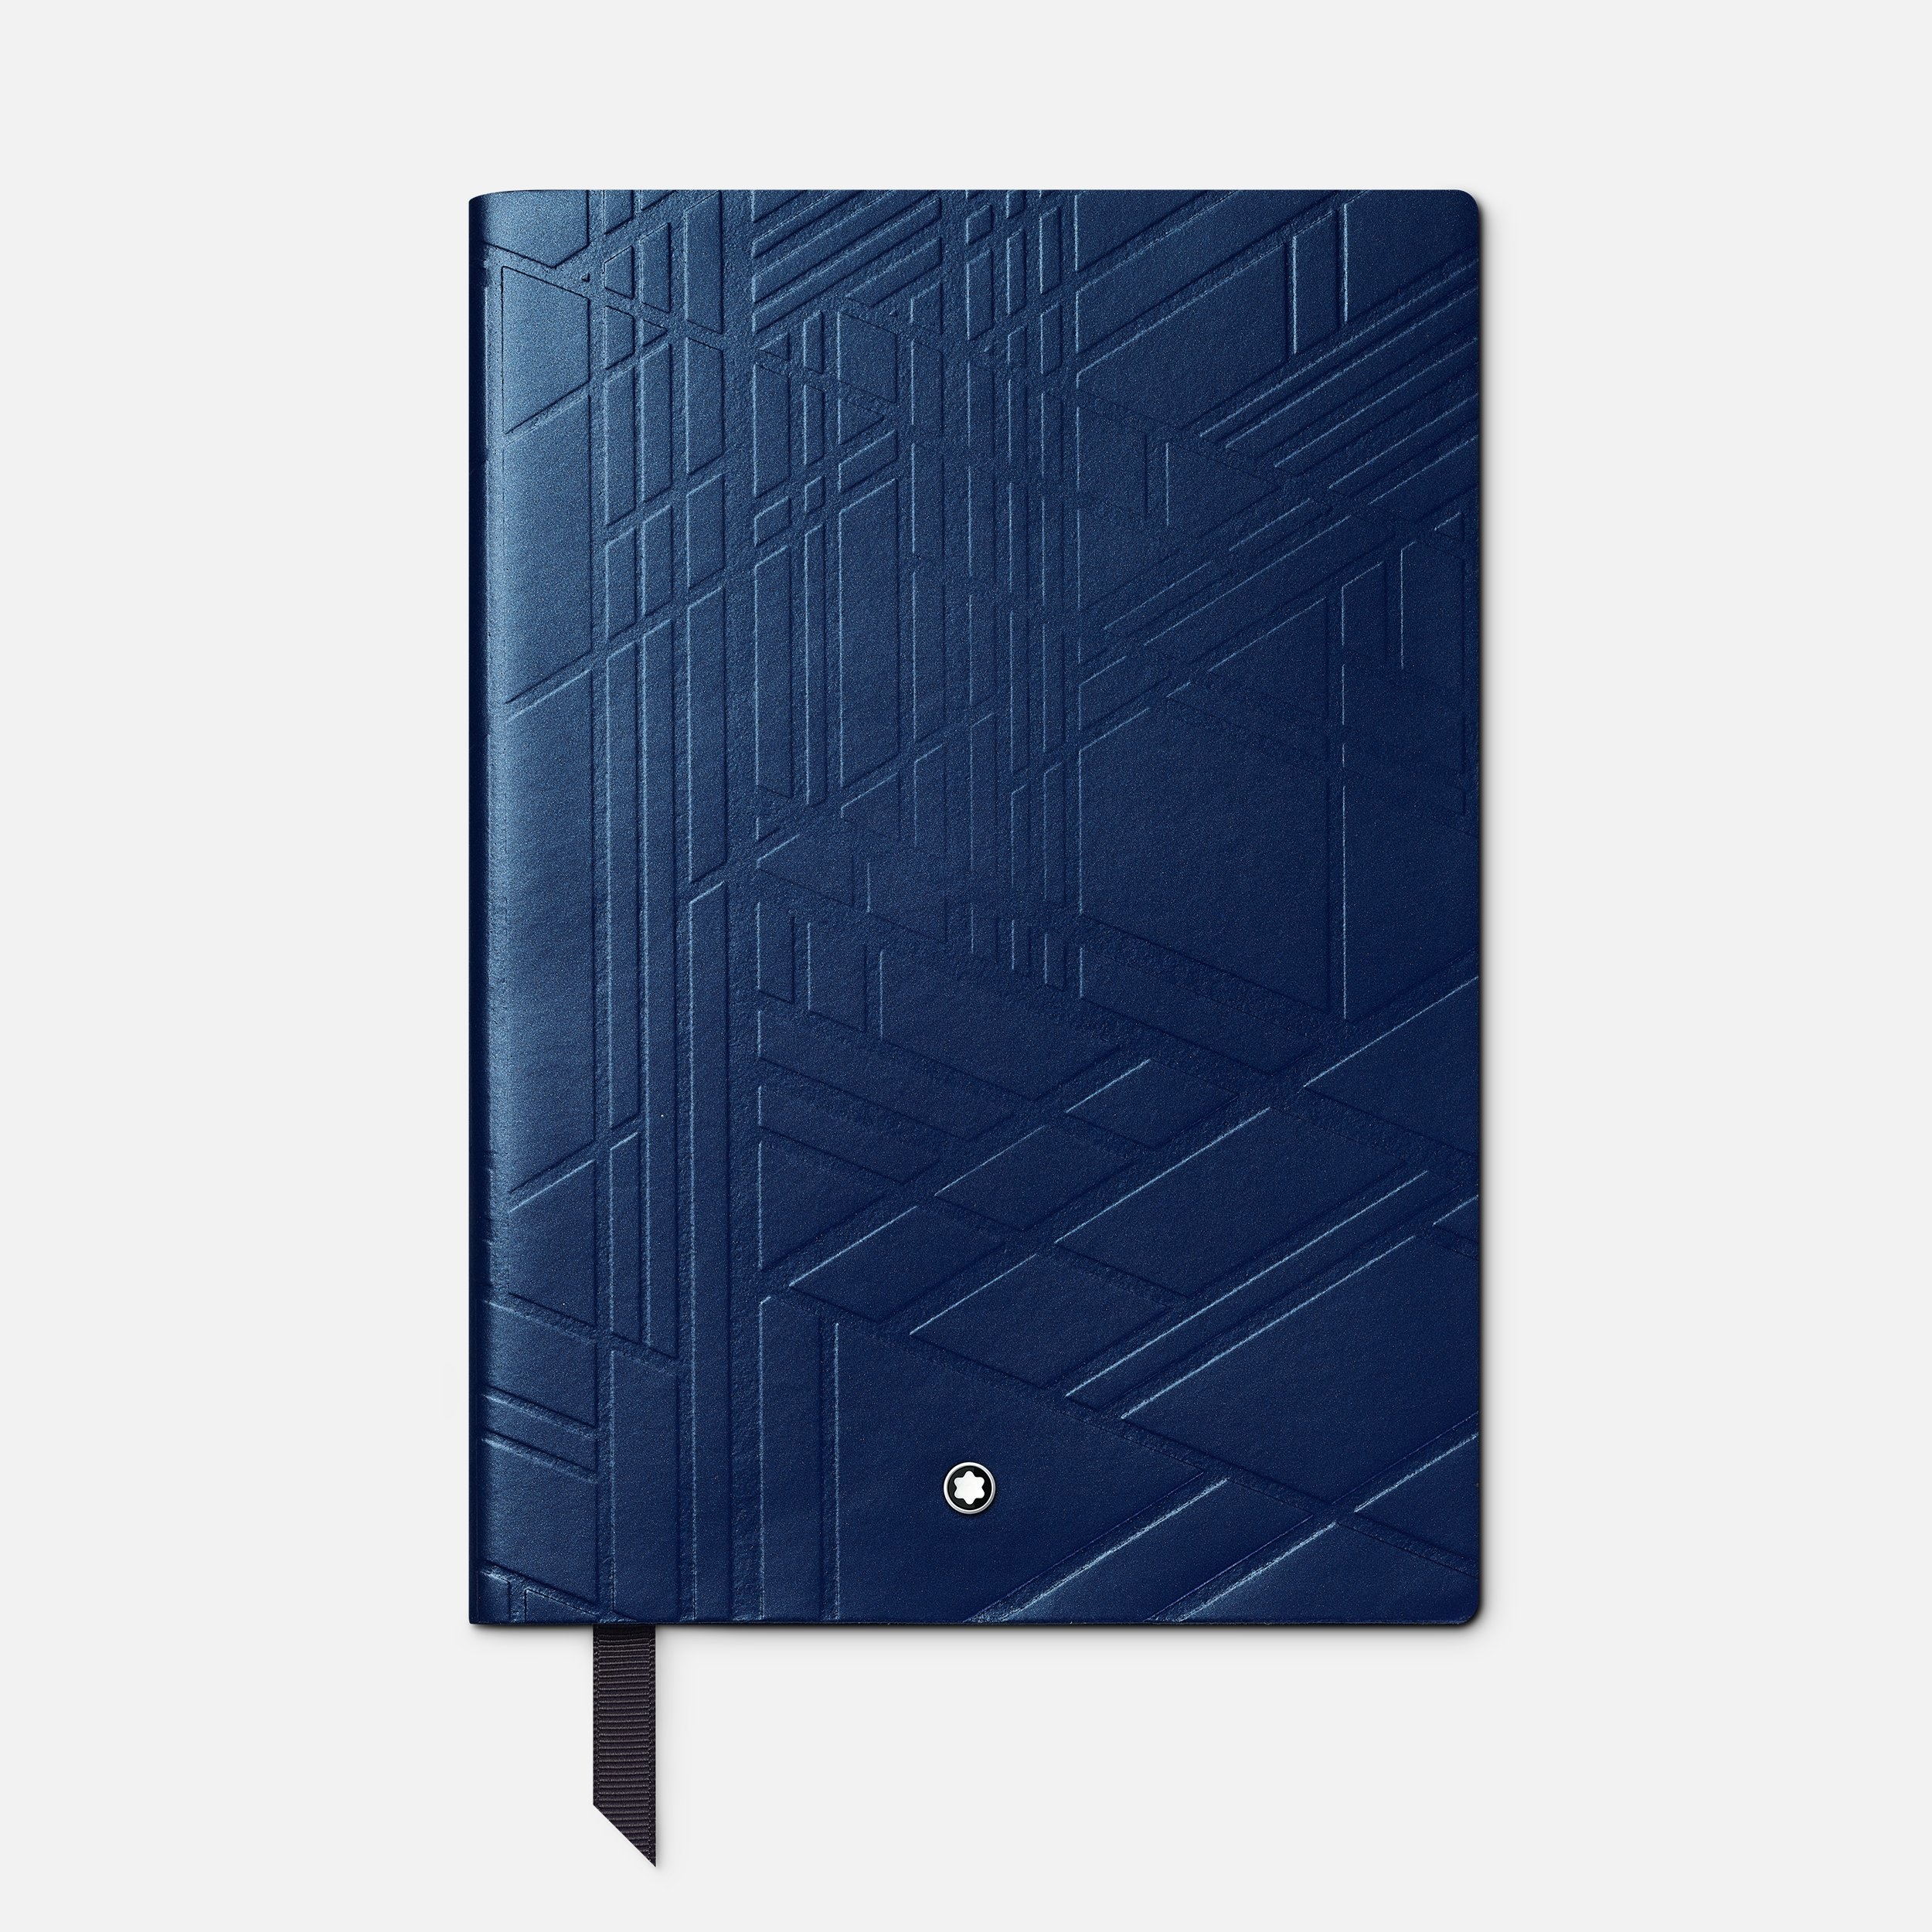 Notebook #146 small, Starwalker Space Blue, blue lined - 1